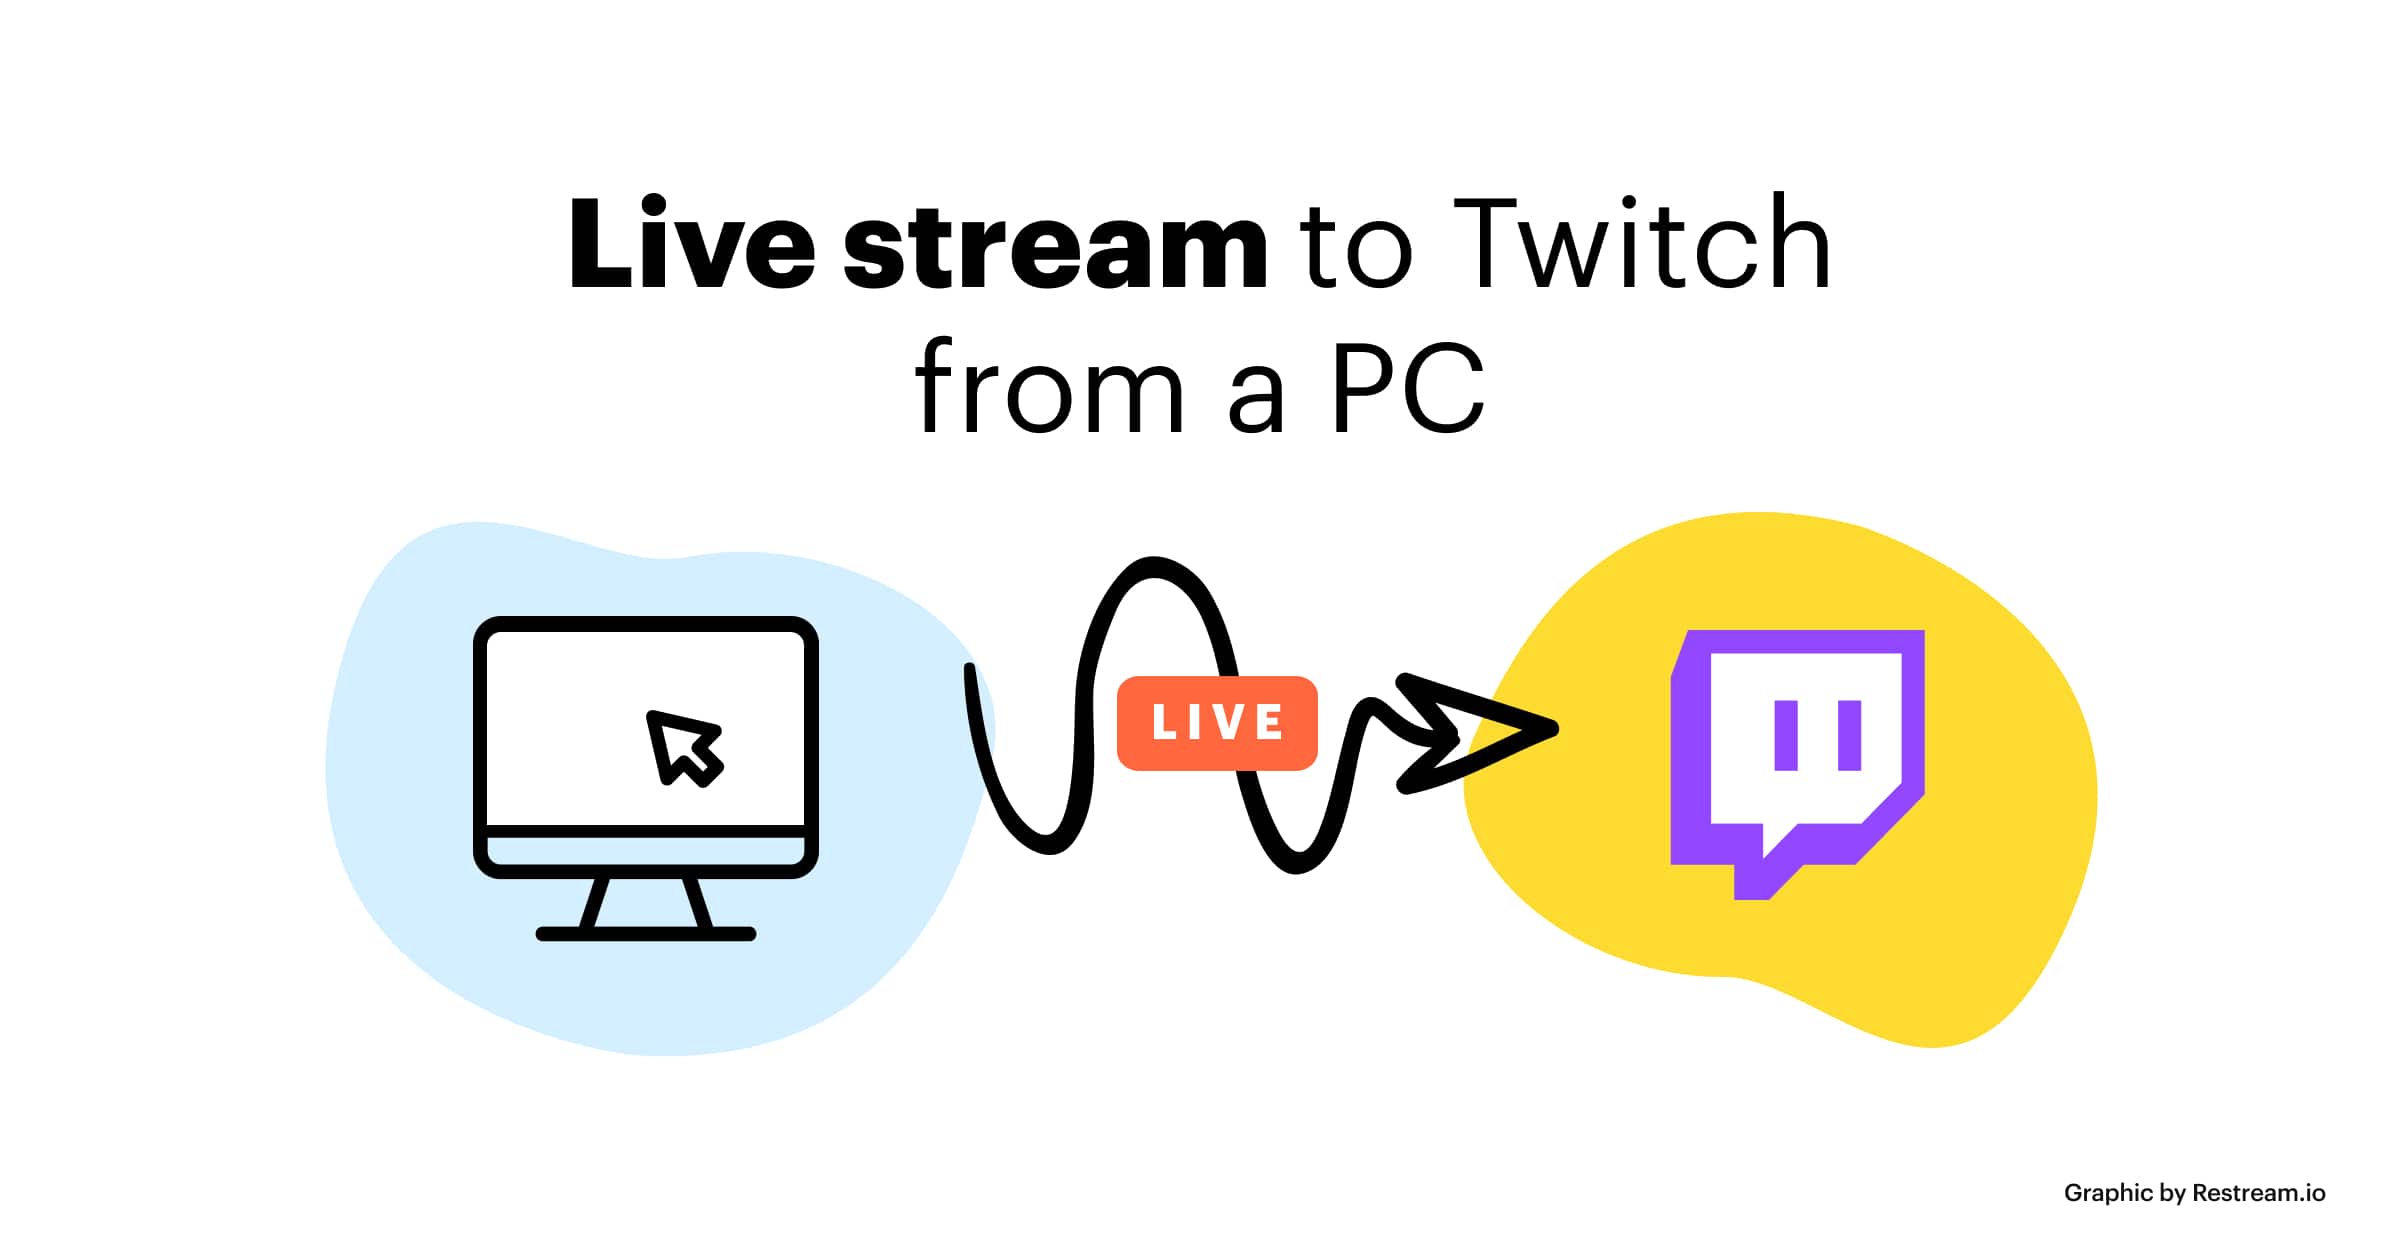 Live stream to Twitch from a PC